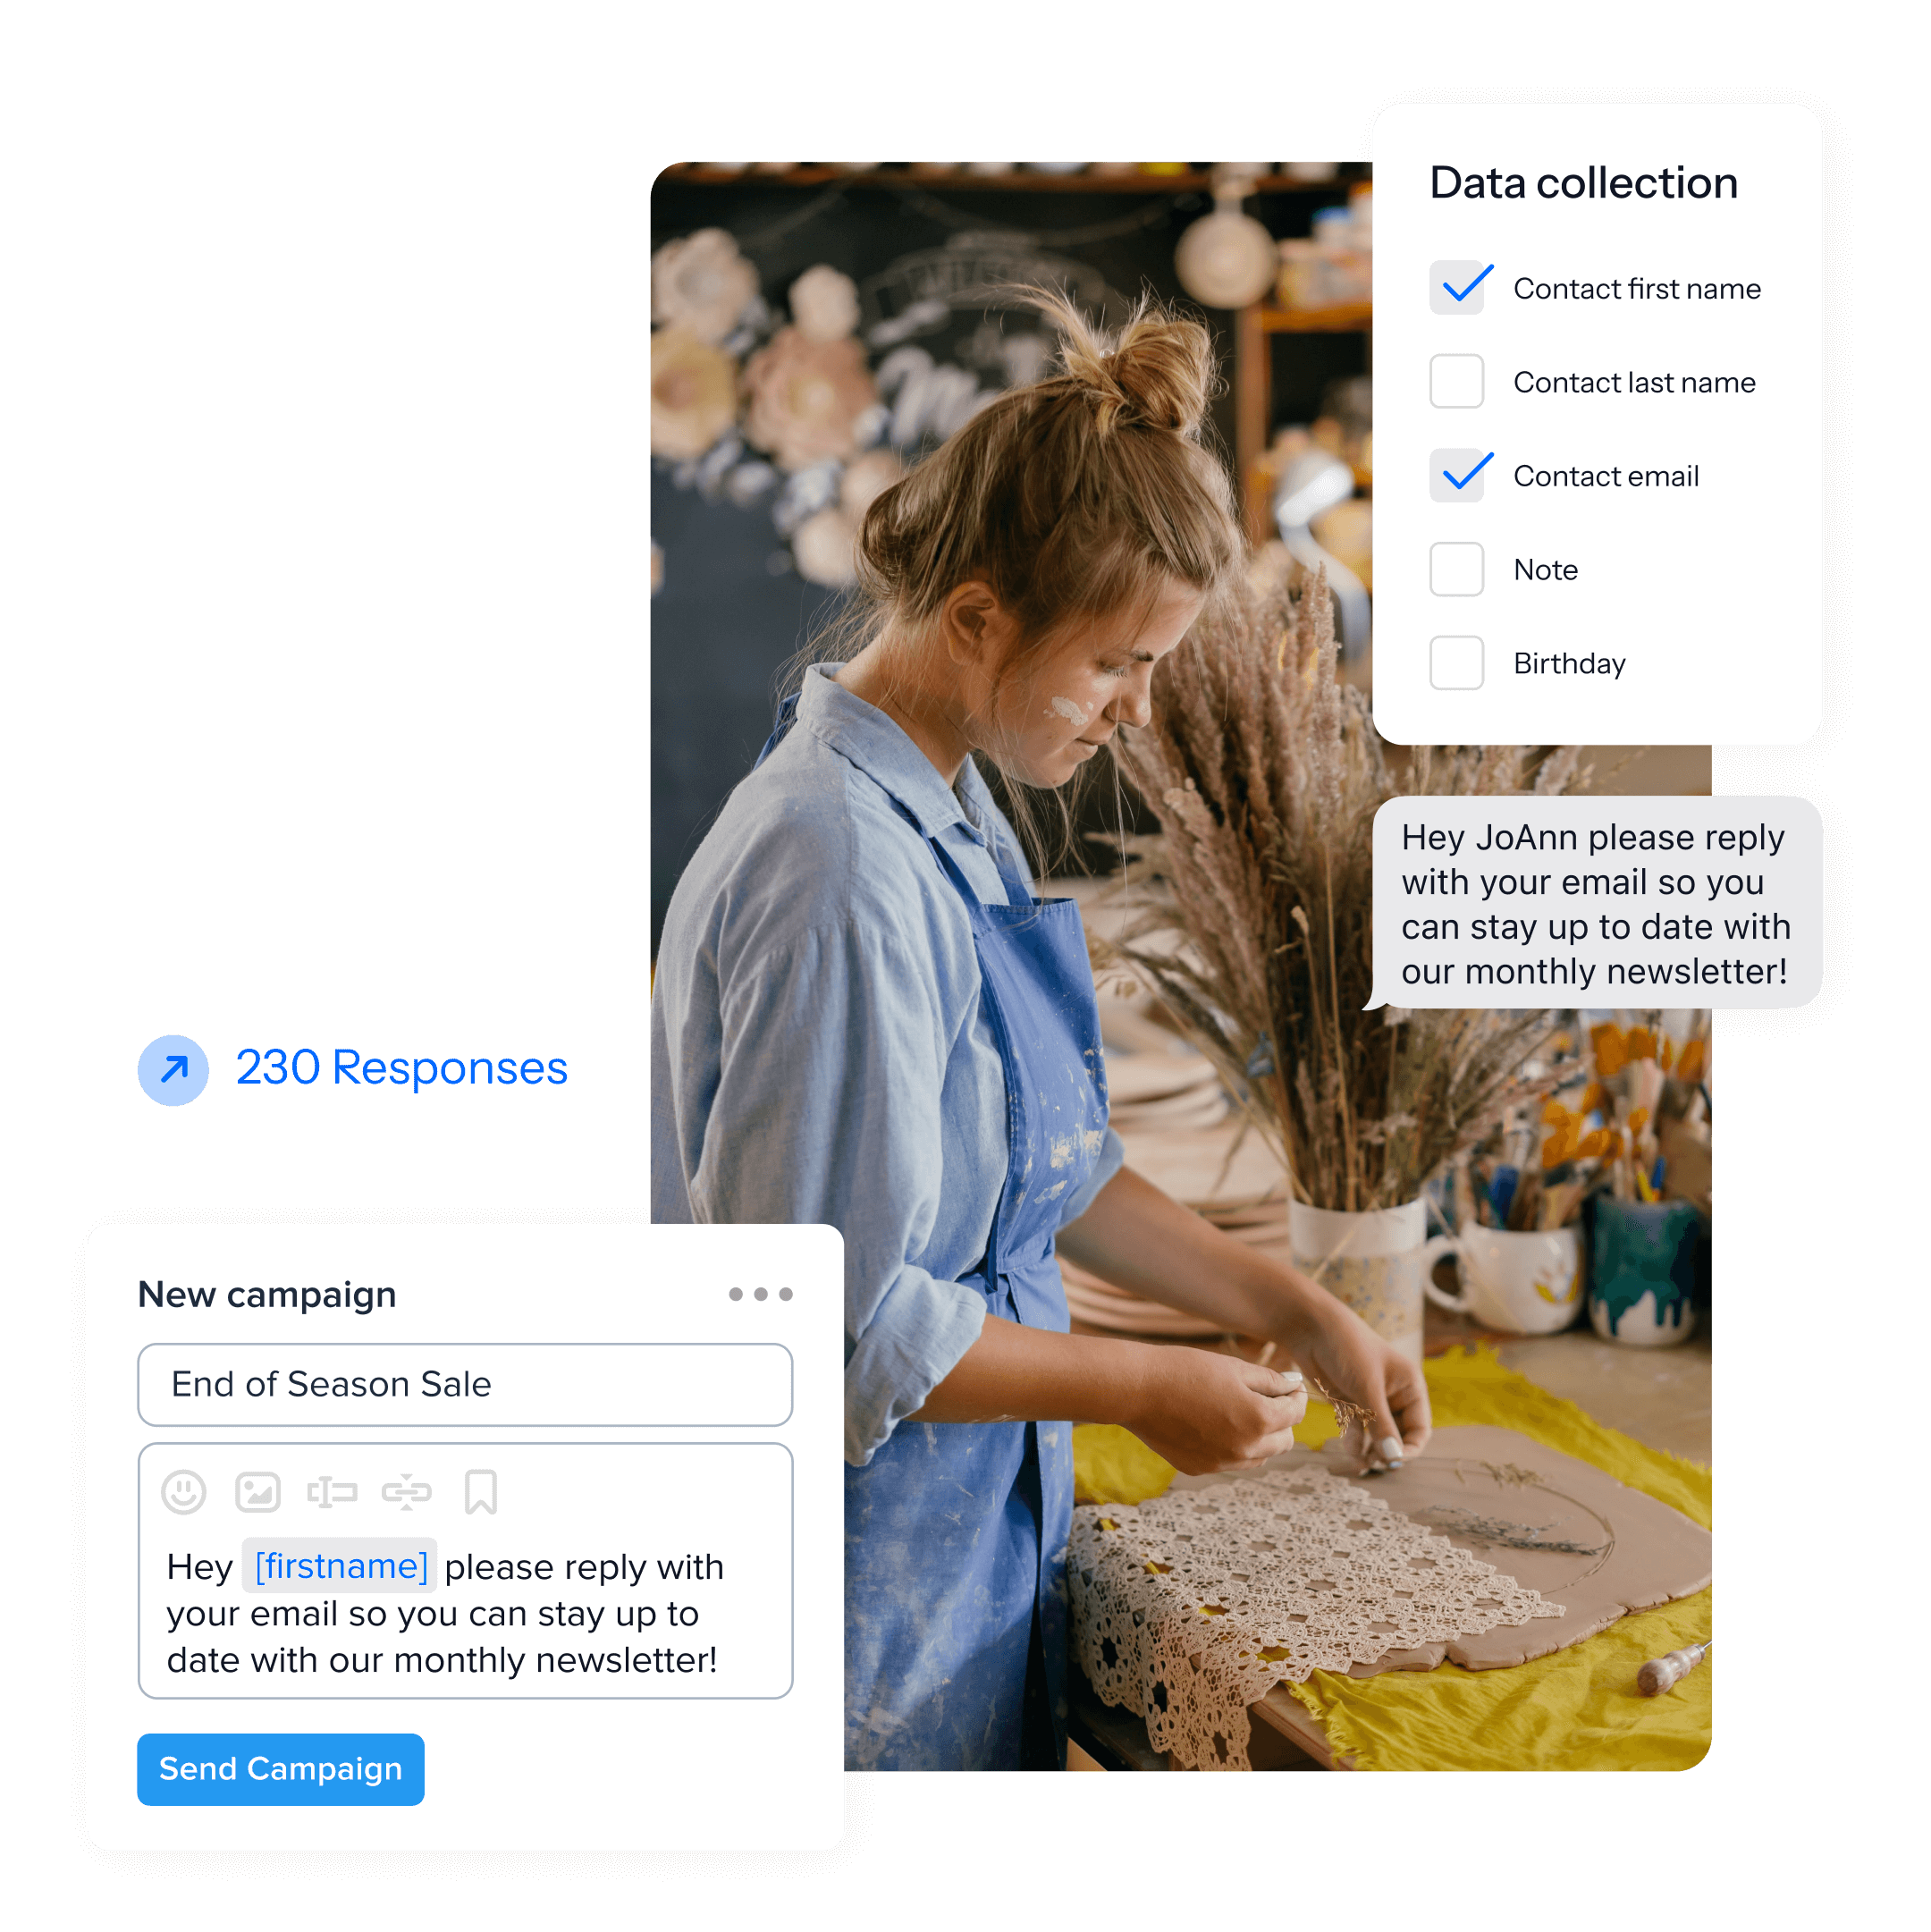 A photo of a woman making crafts. There are UI elements overlaid on top of the photo which demonstrate the ability to personalize your mass text with custom fields such as first name.